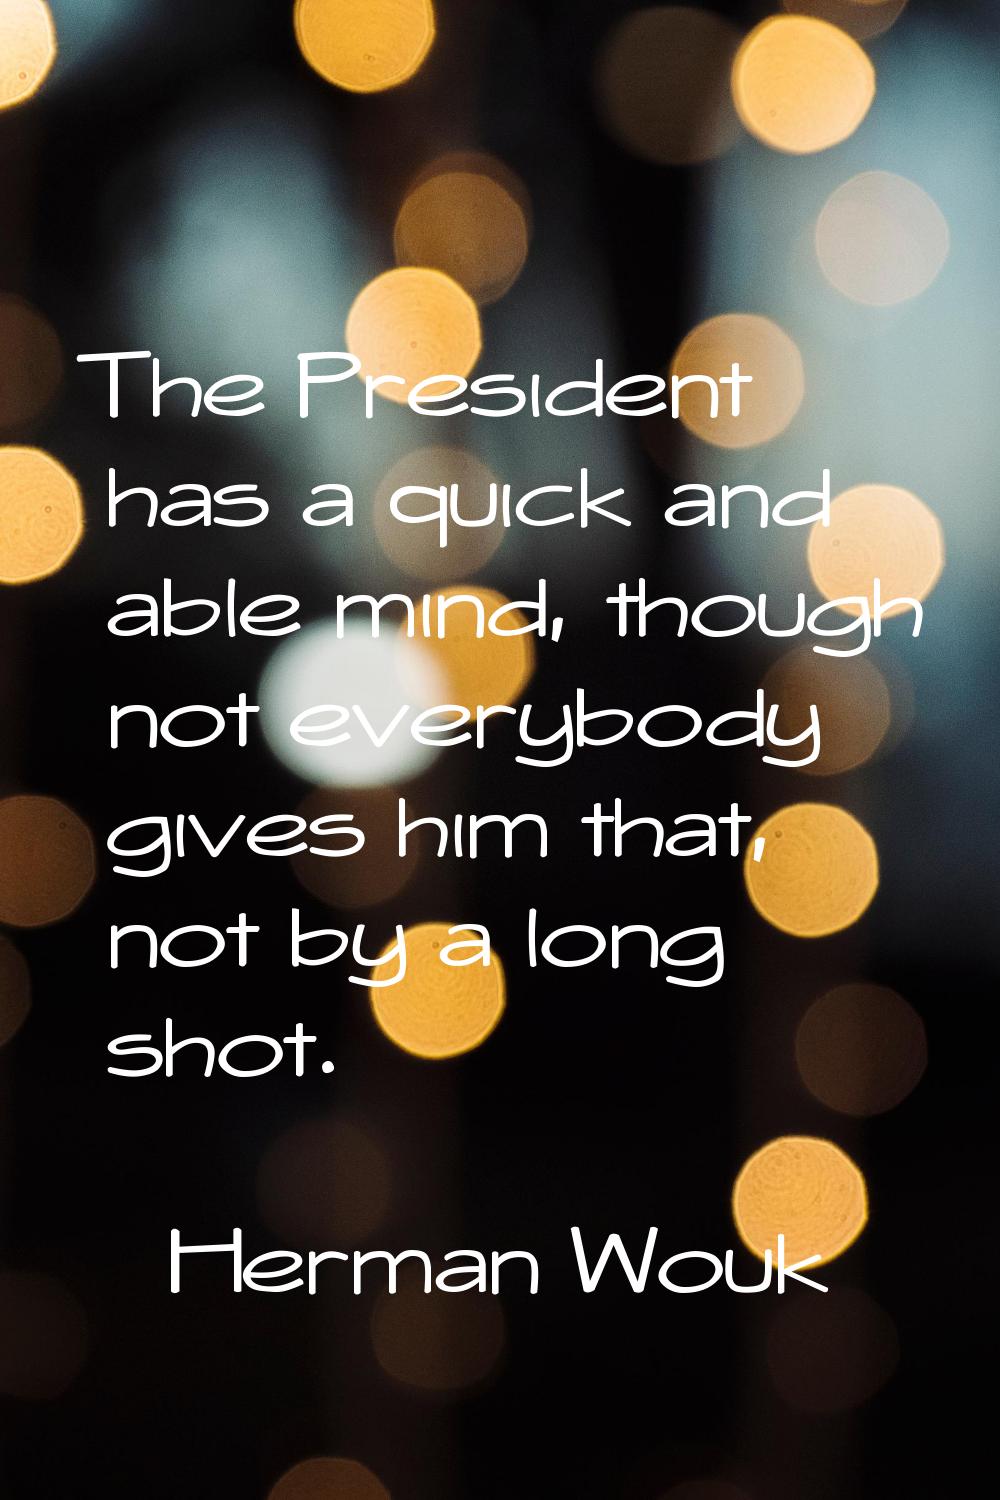 The President has a quick and able mind, though not everybody gives him that, not by a long shot.